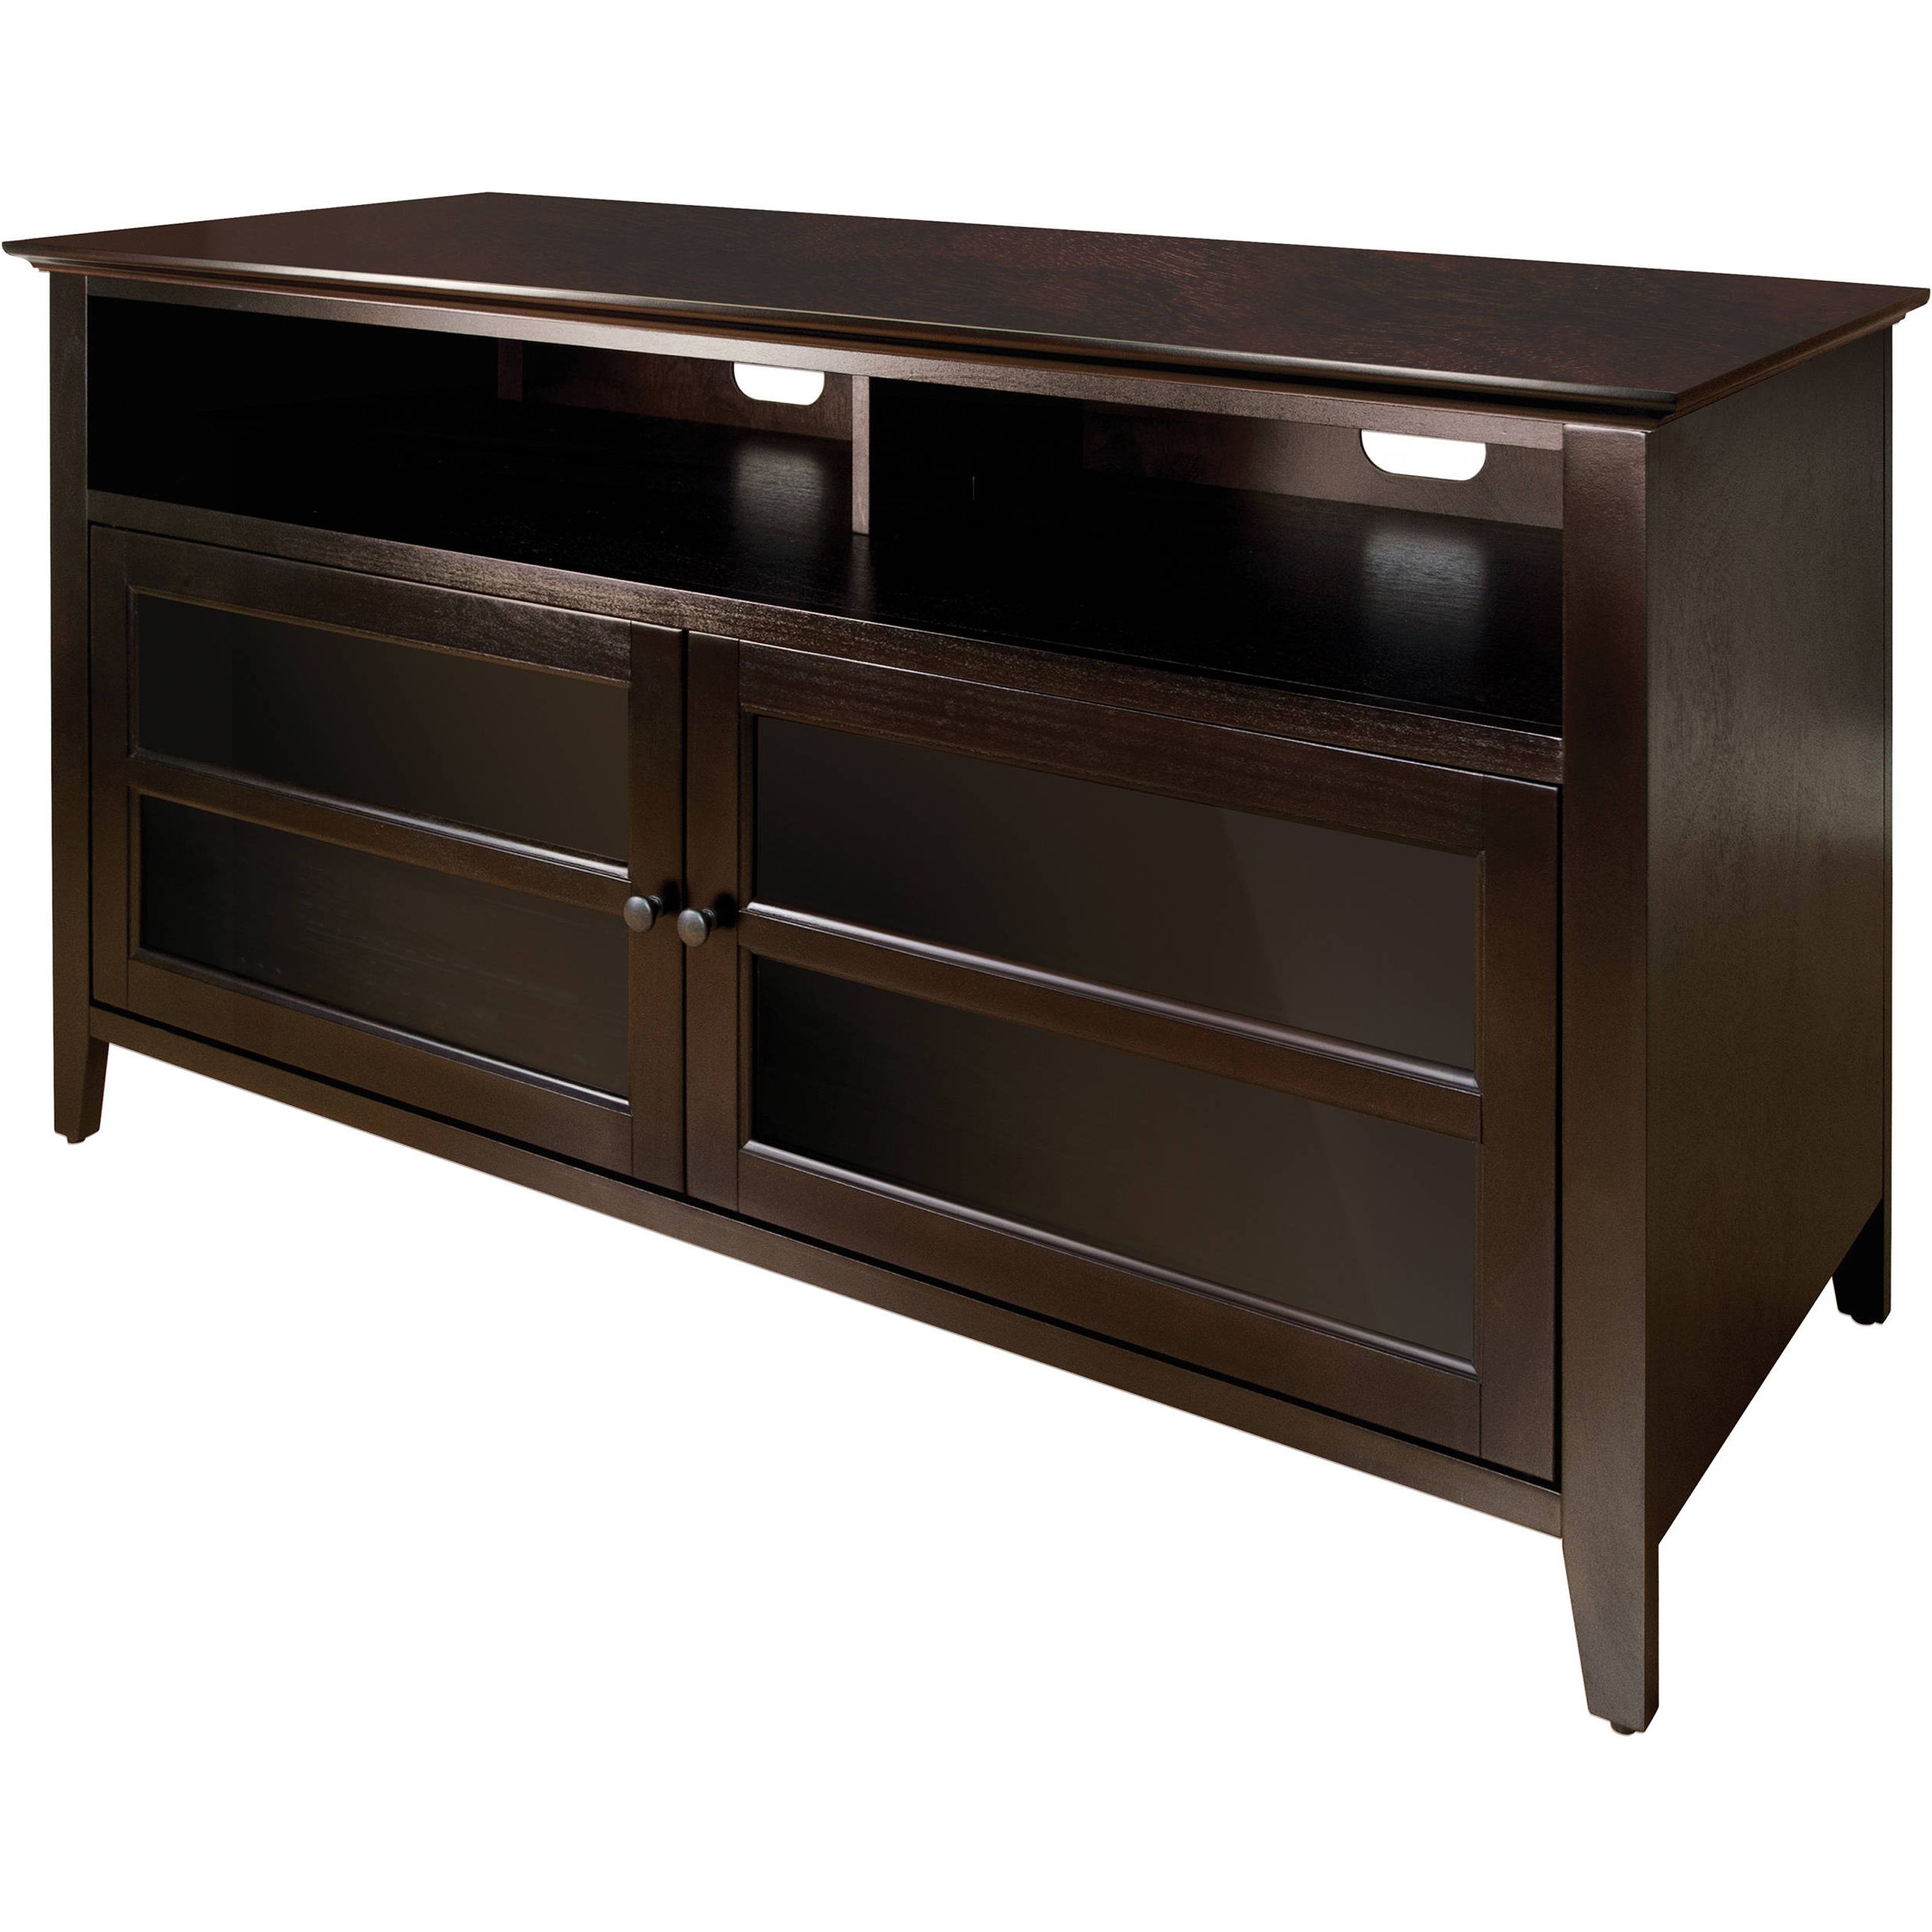 Preferred Bell'o Wavs99144 Tv Stand And Audio/video Cabinet Wavs99144 B&h In Dark Tv Stands (View 19 of 20)